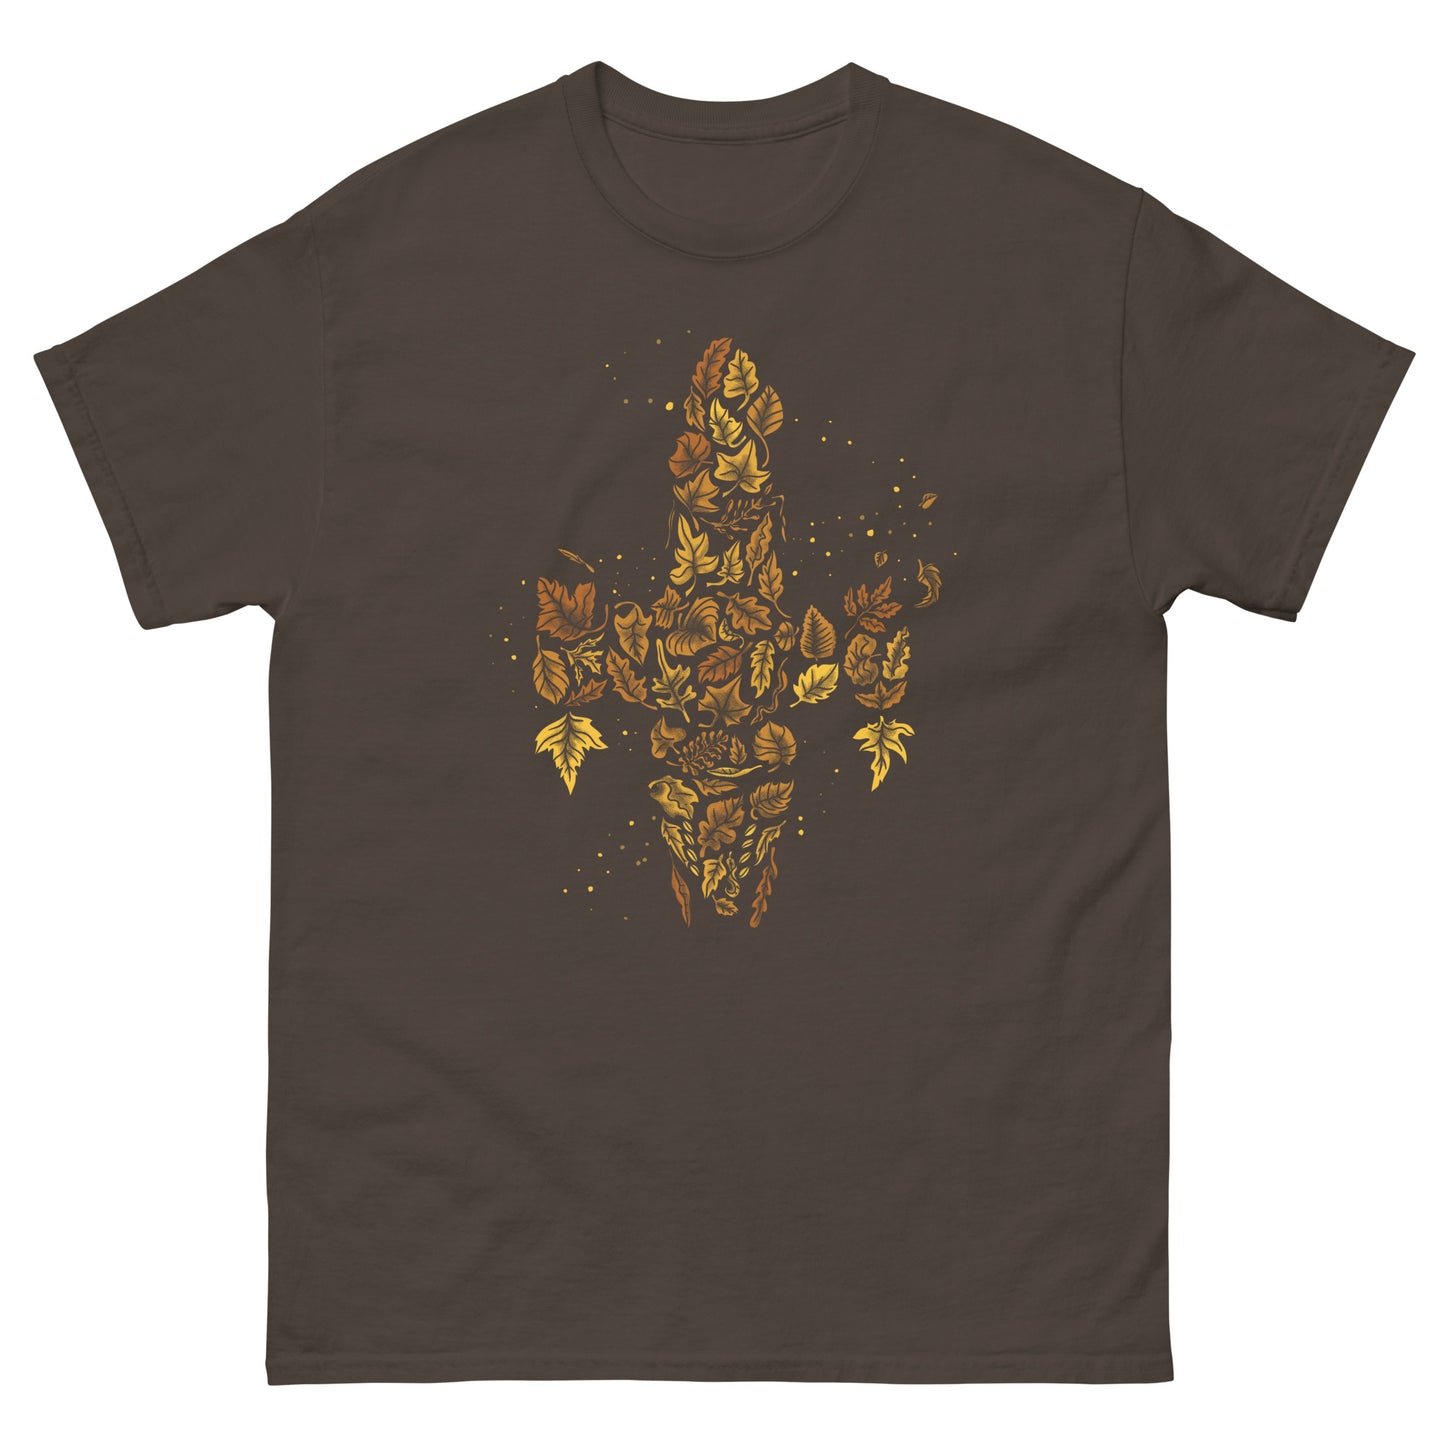 I am a leaf on the wind - Serenity and Firefly tee